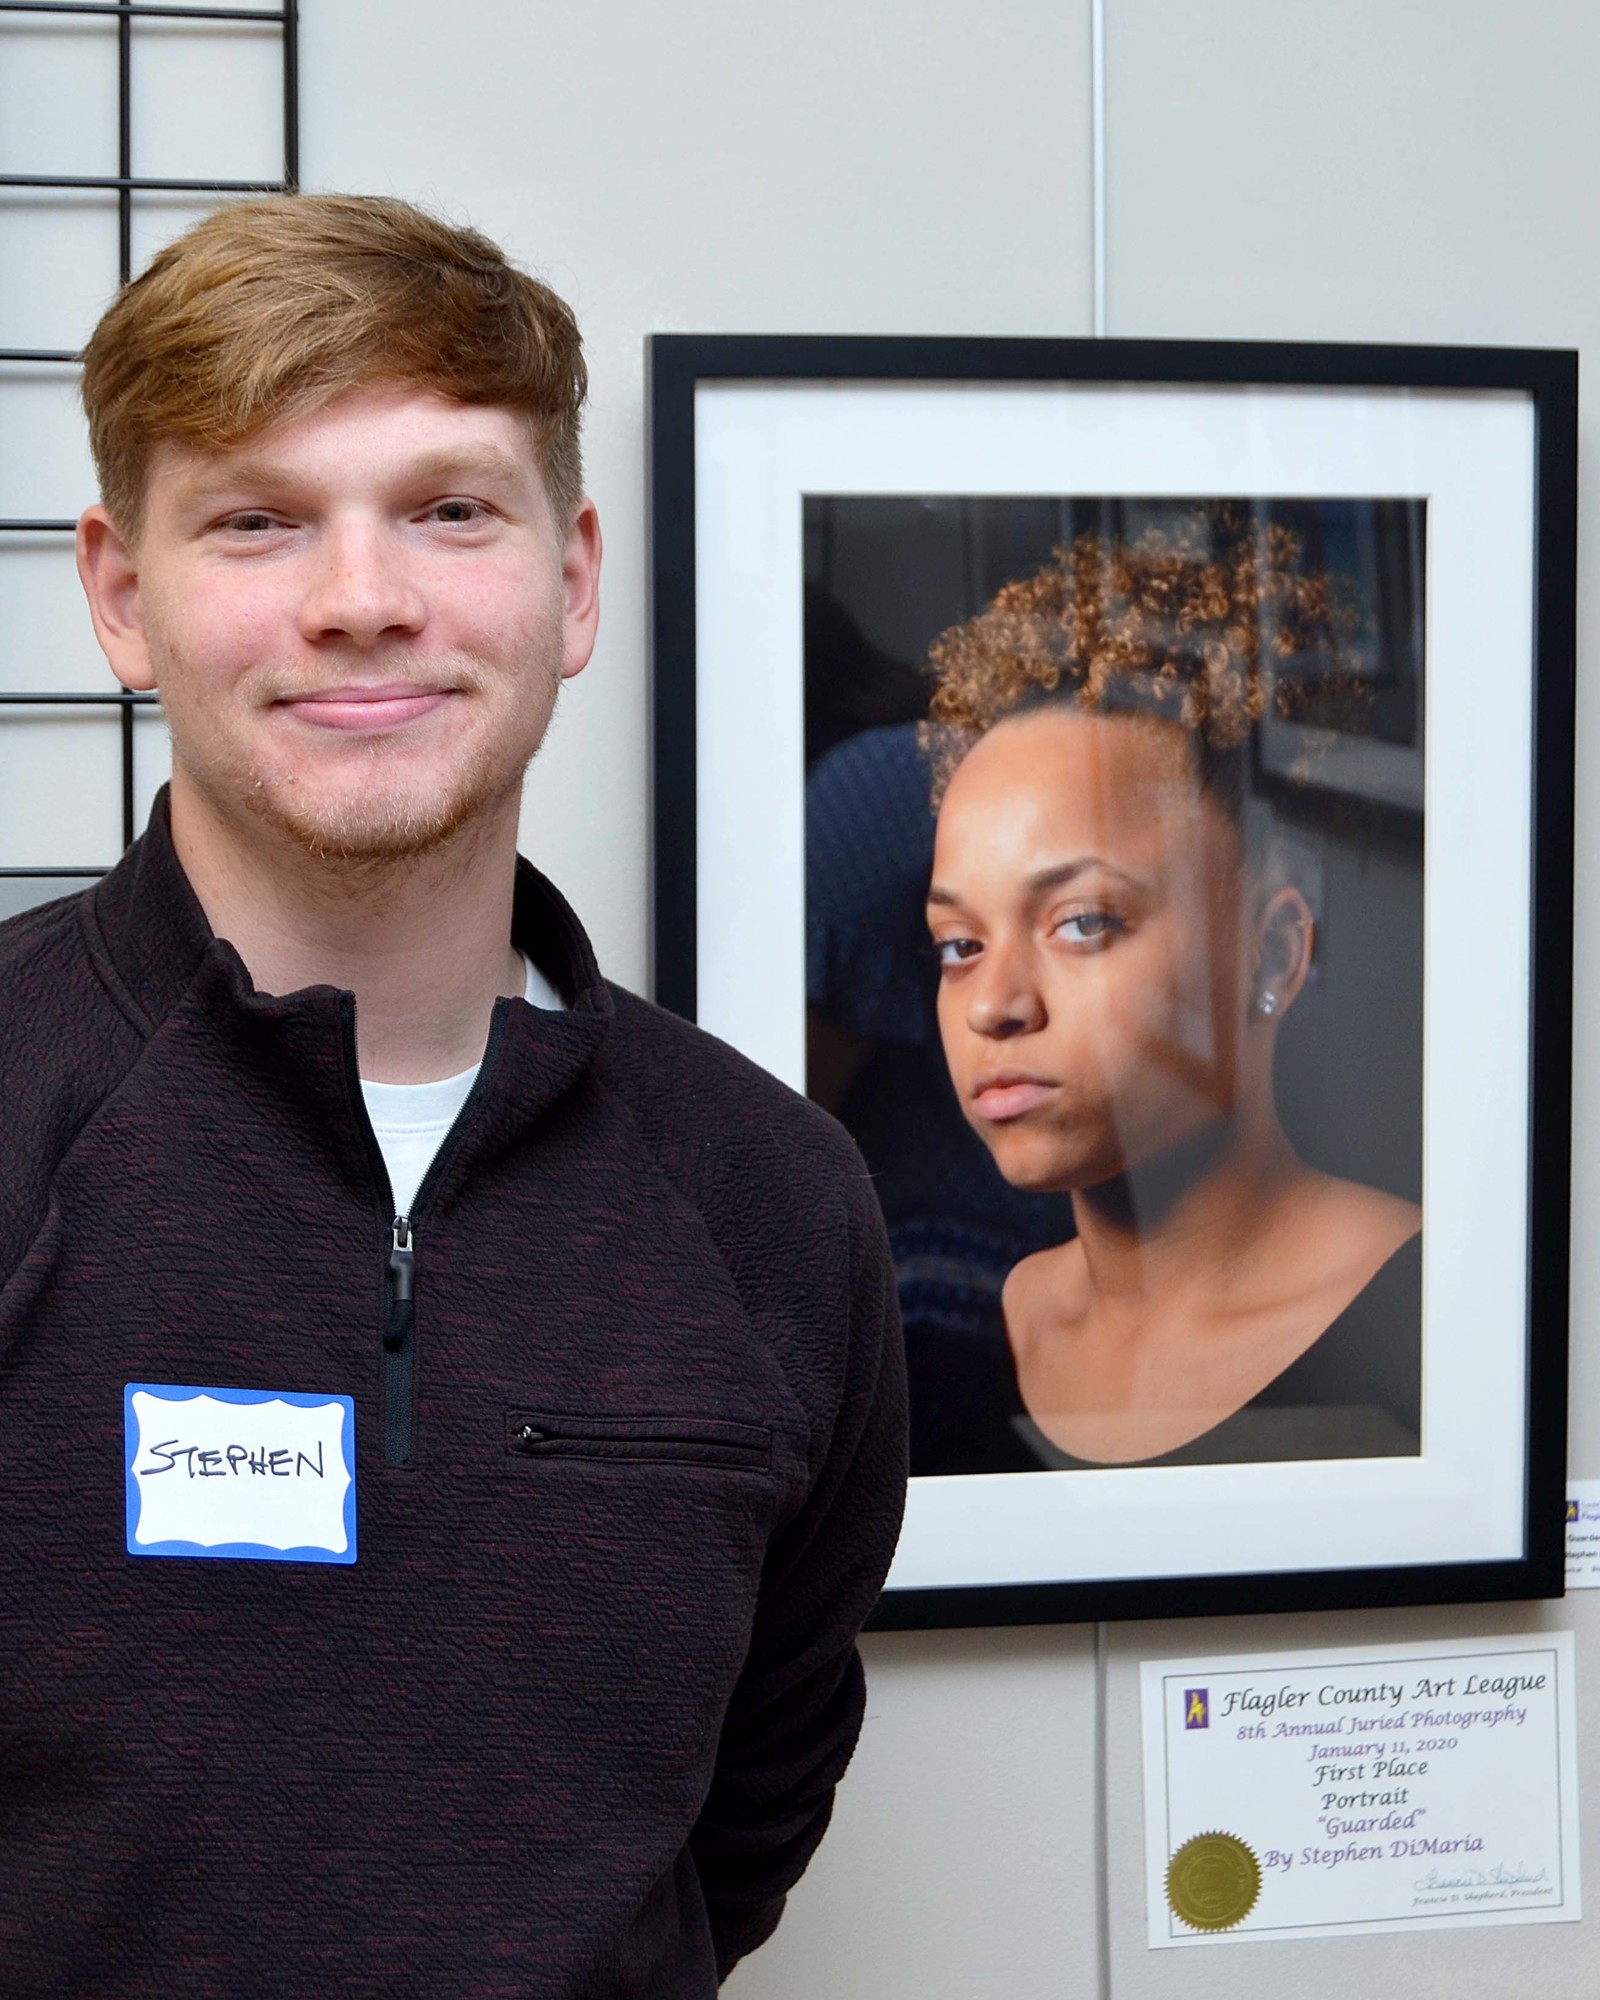 Steven DiMaria with his first place-winning portrait, 